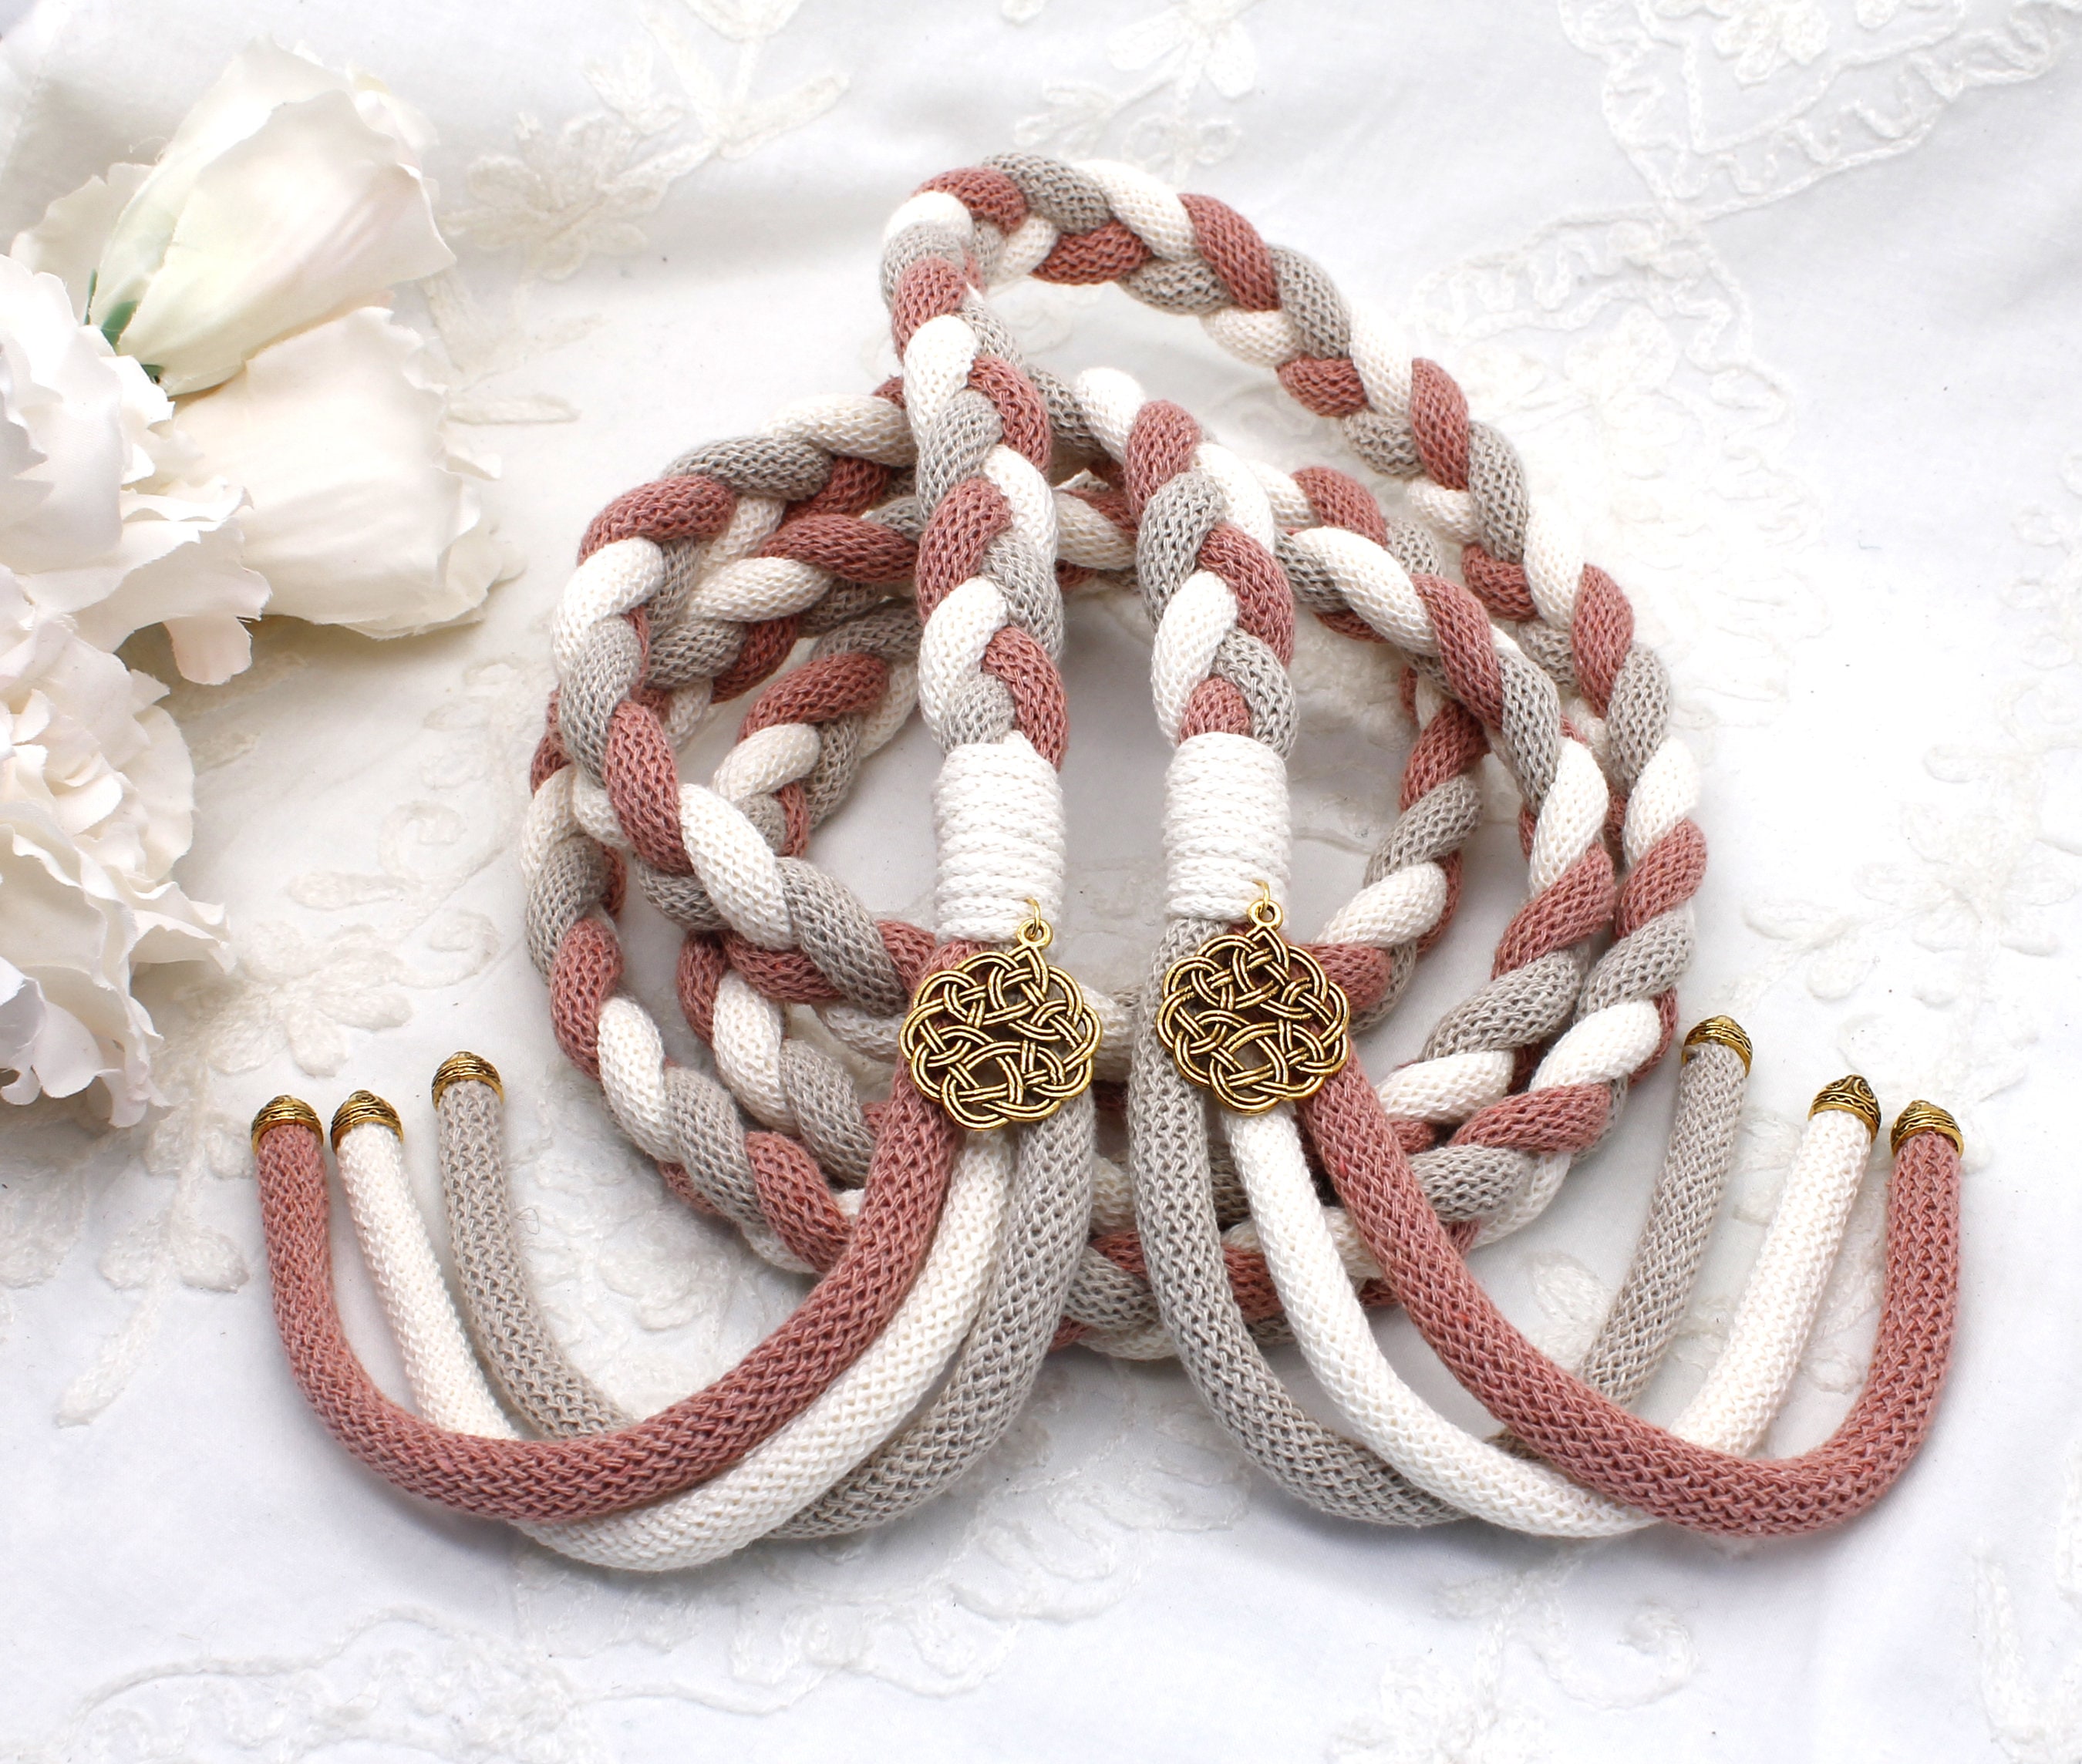 Reviews, Chews & How-Tos: How to Braid a Handfasting Cord